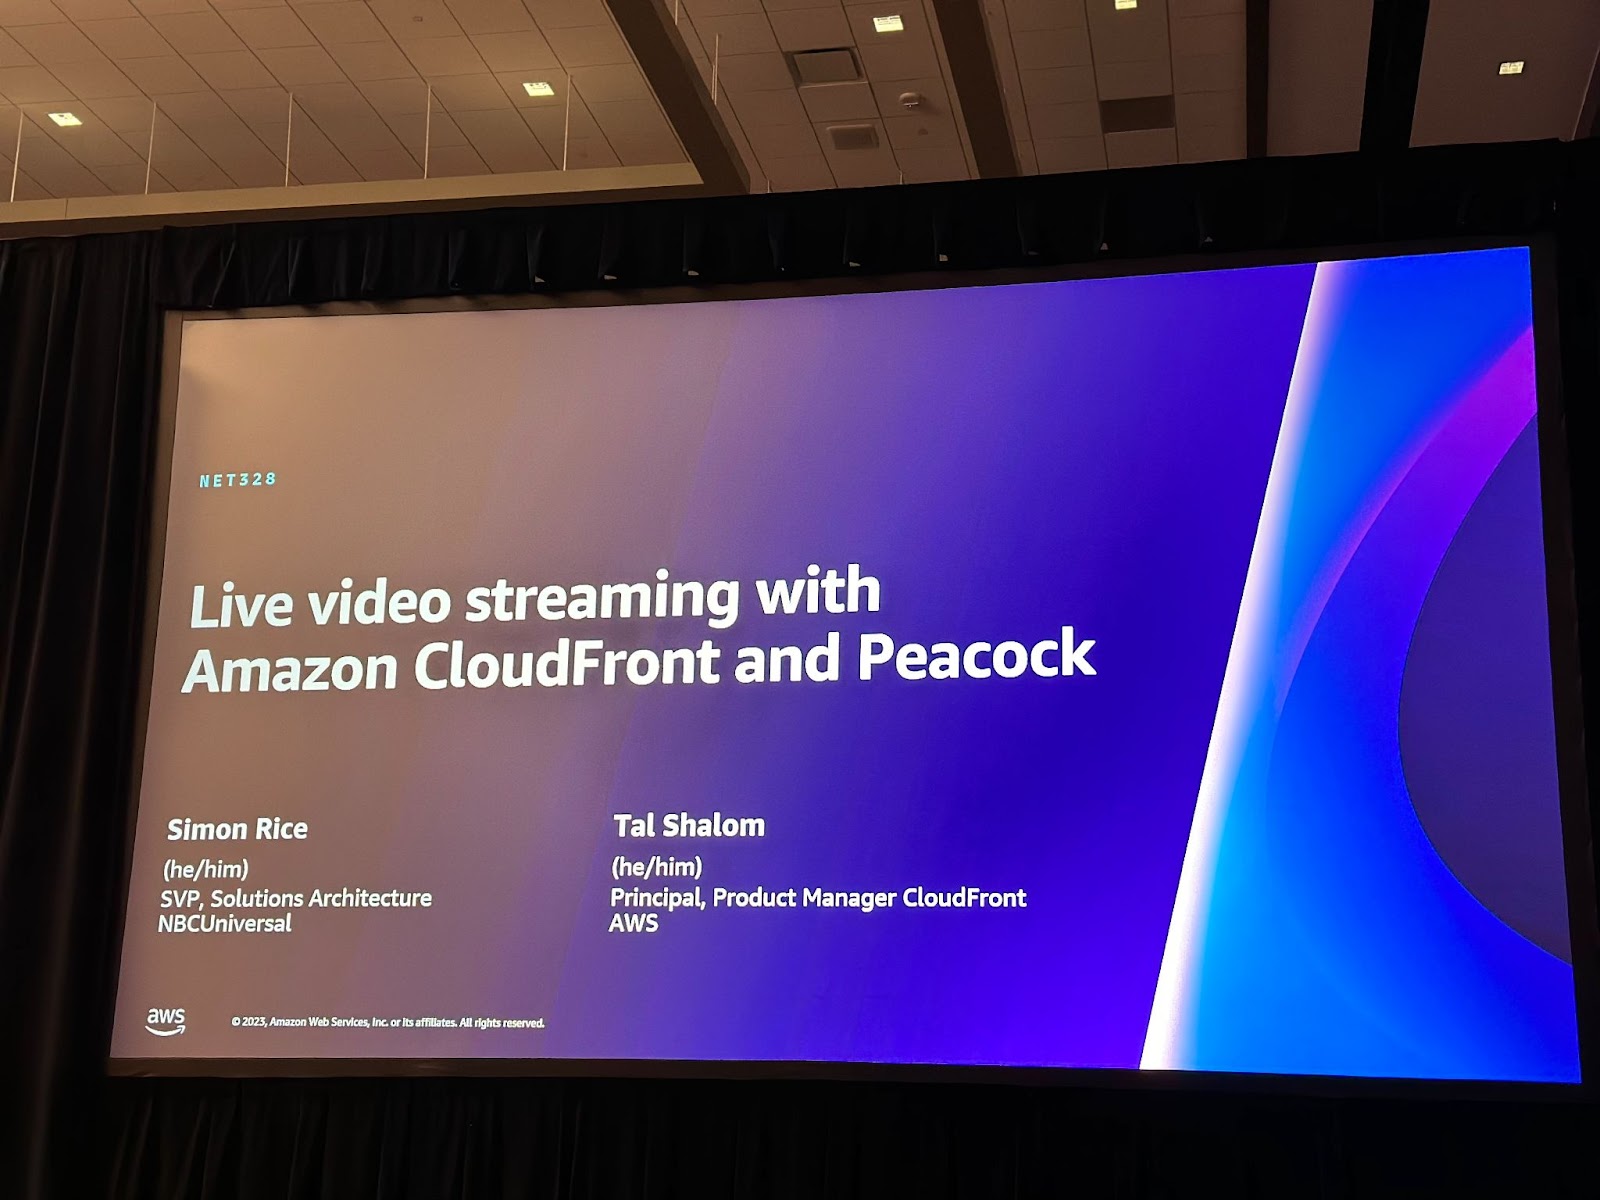 Live video streaming with Amazon CloudFront and Peacock